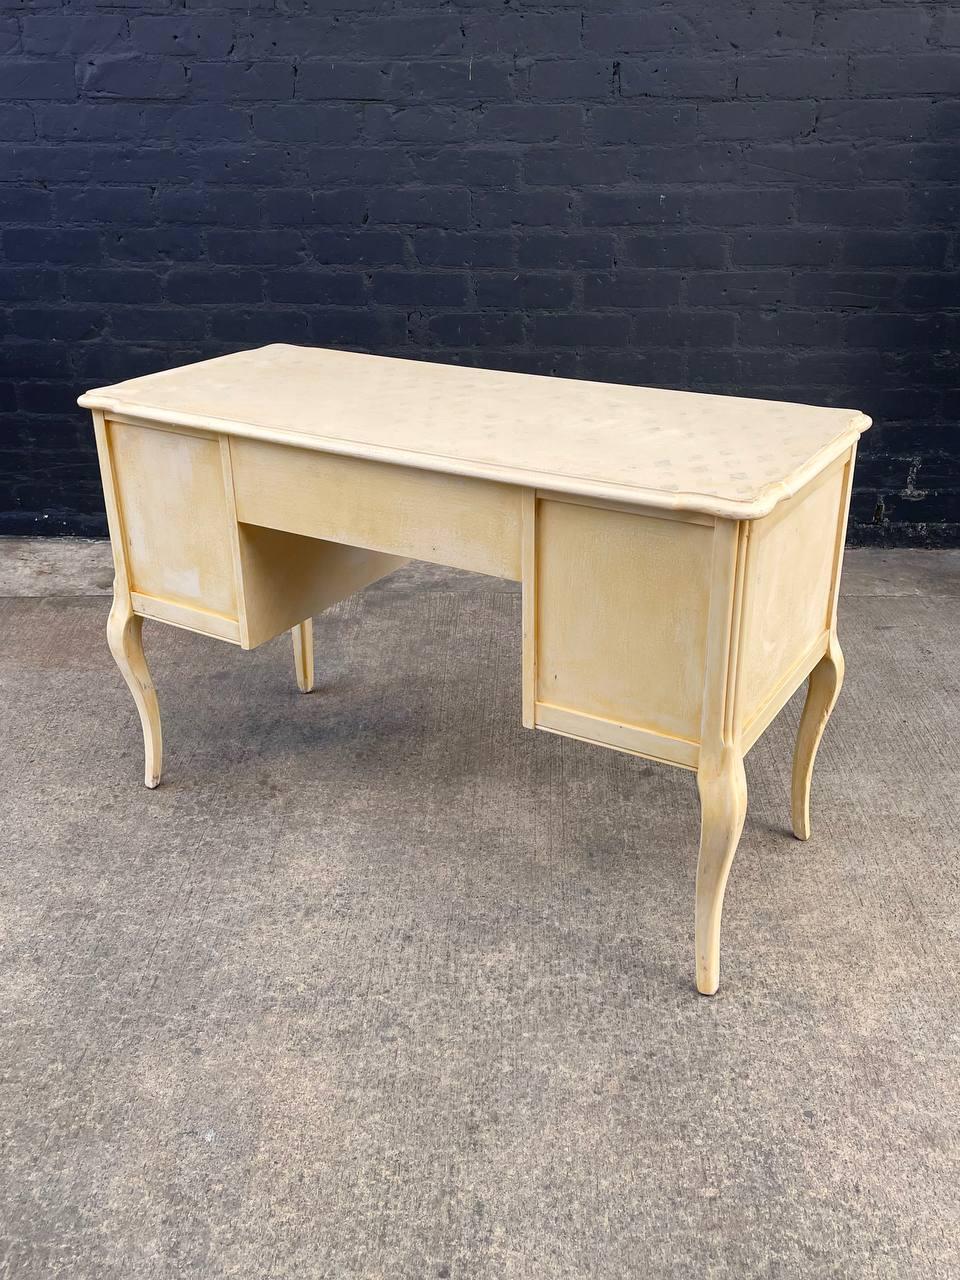 Vintage French Provincial Style Painted Writing Desk In Good Condition For Sale In Los Angeles, CA